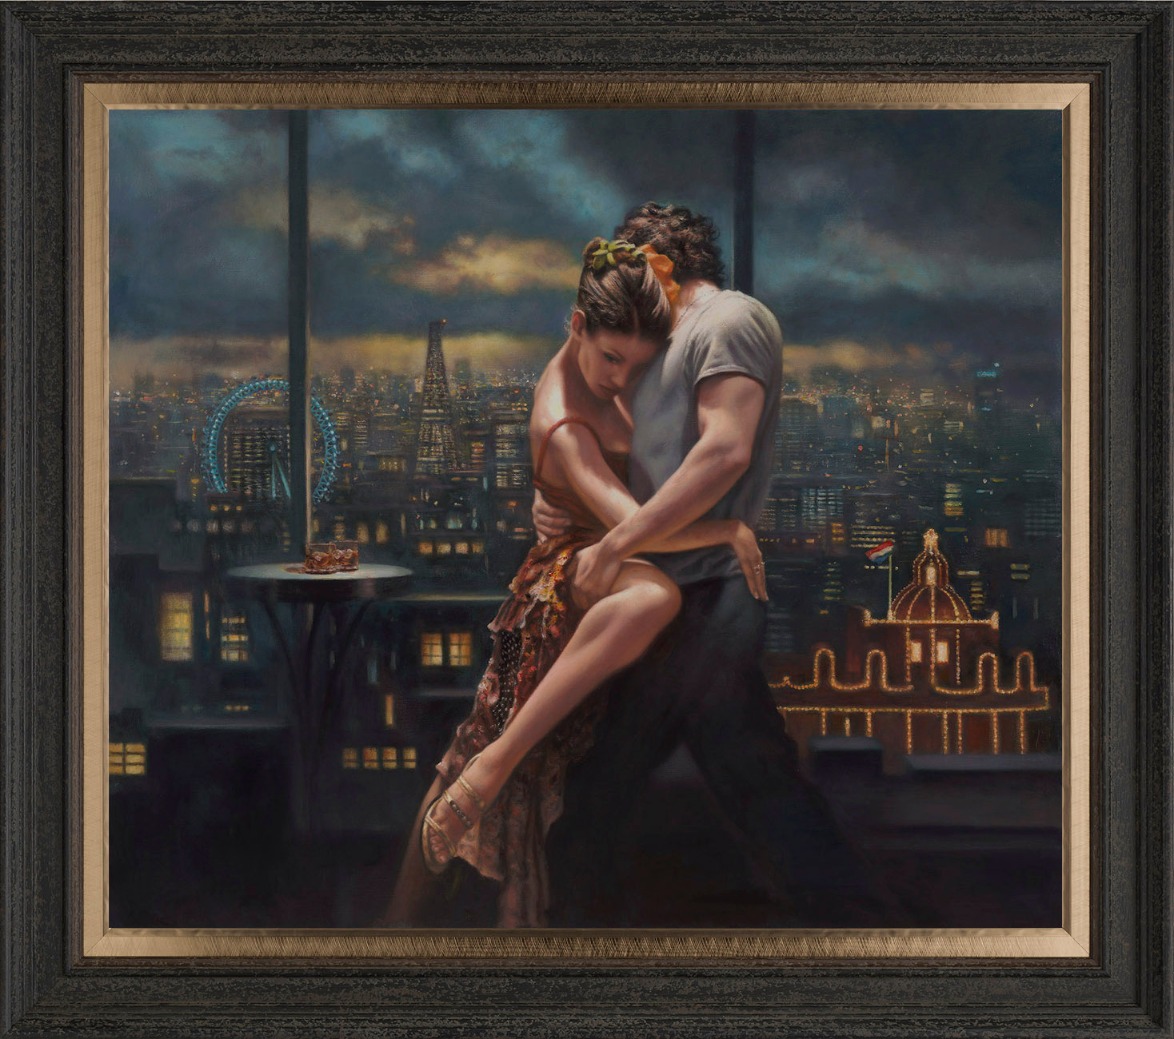 The World Stands Still by Hamish Blakely